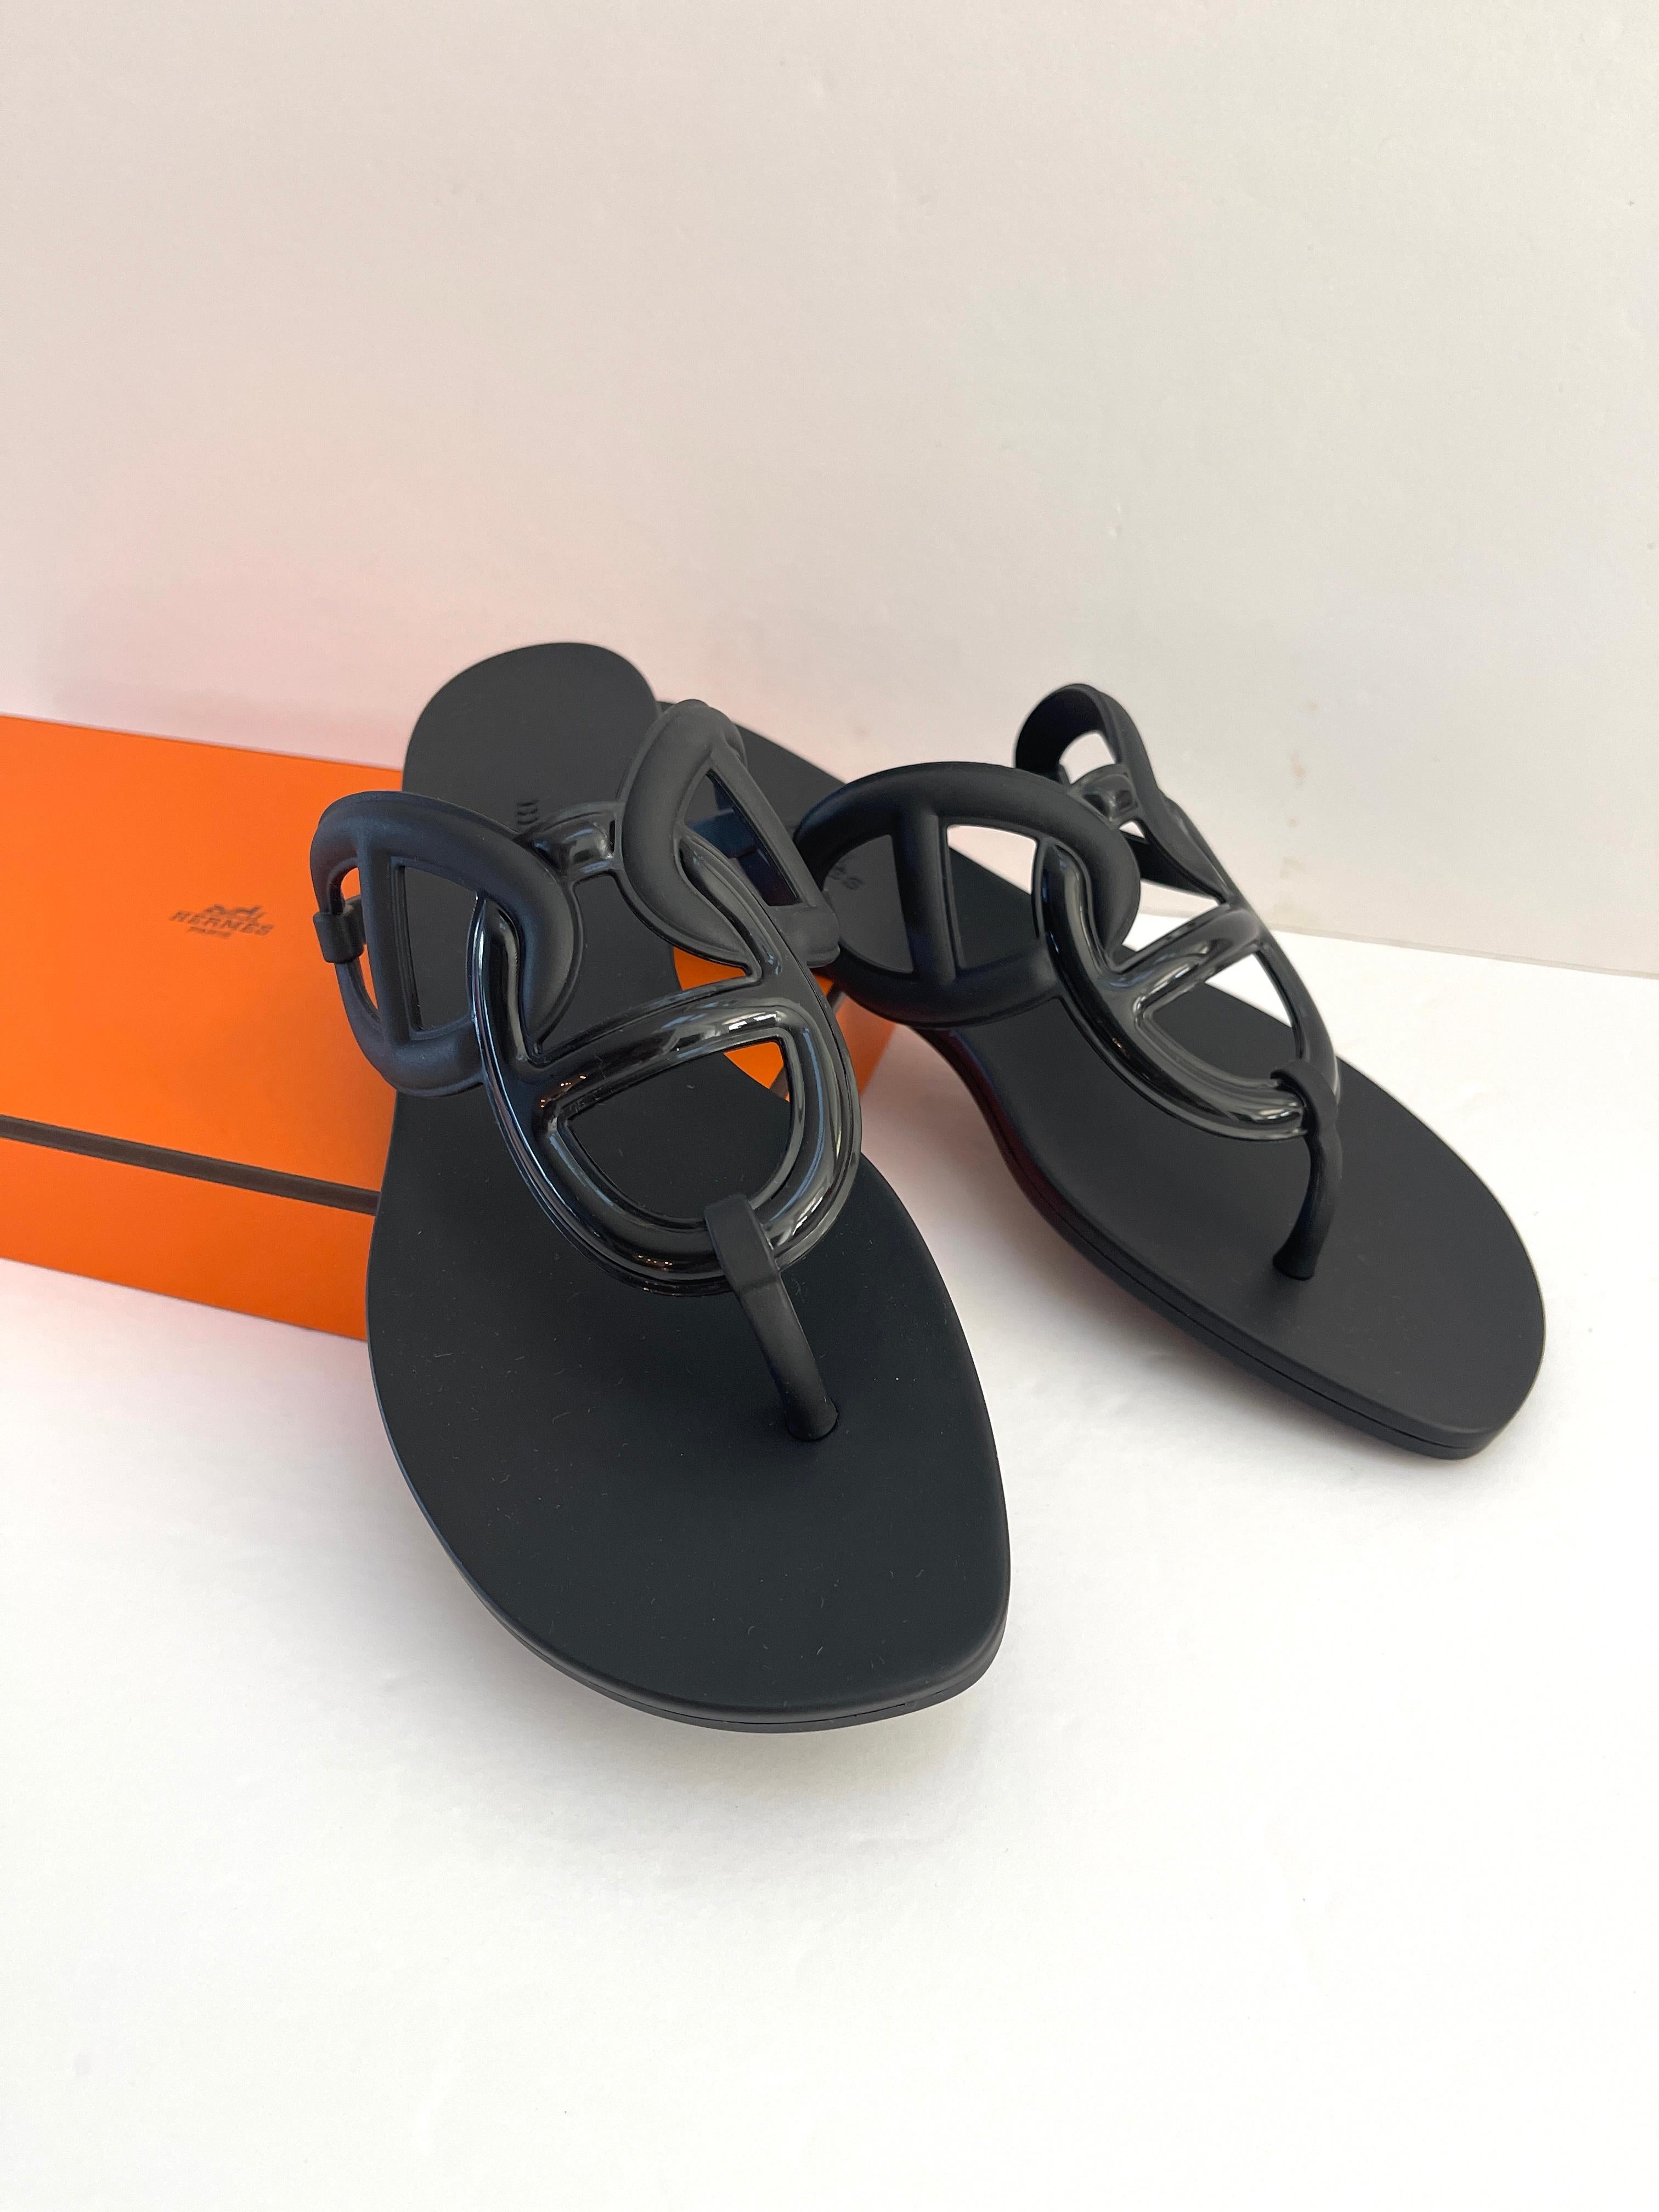 Egerie Sandals
Jelly Rubber
Black
Size 39
New in Hermes Box with Dustcovers
New never used